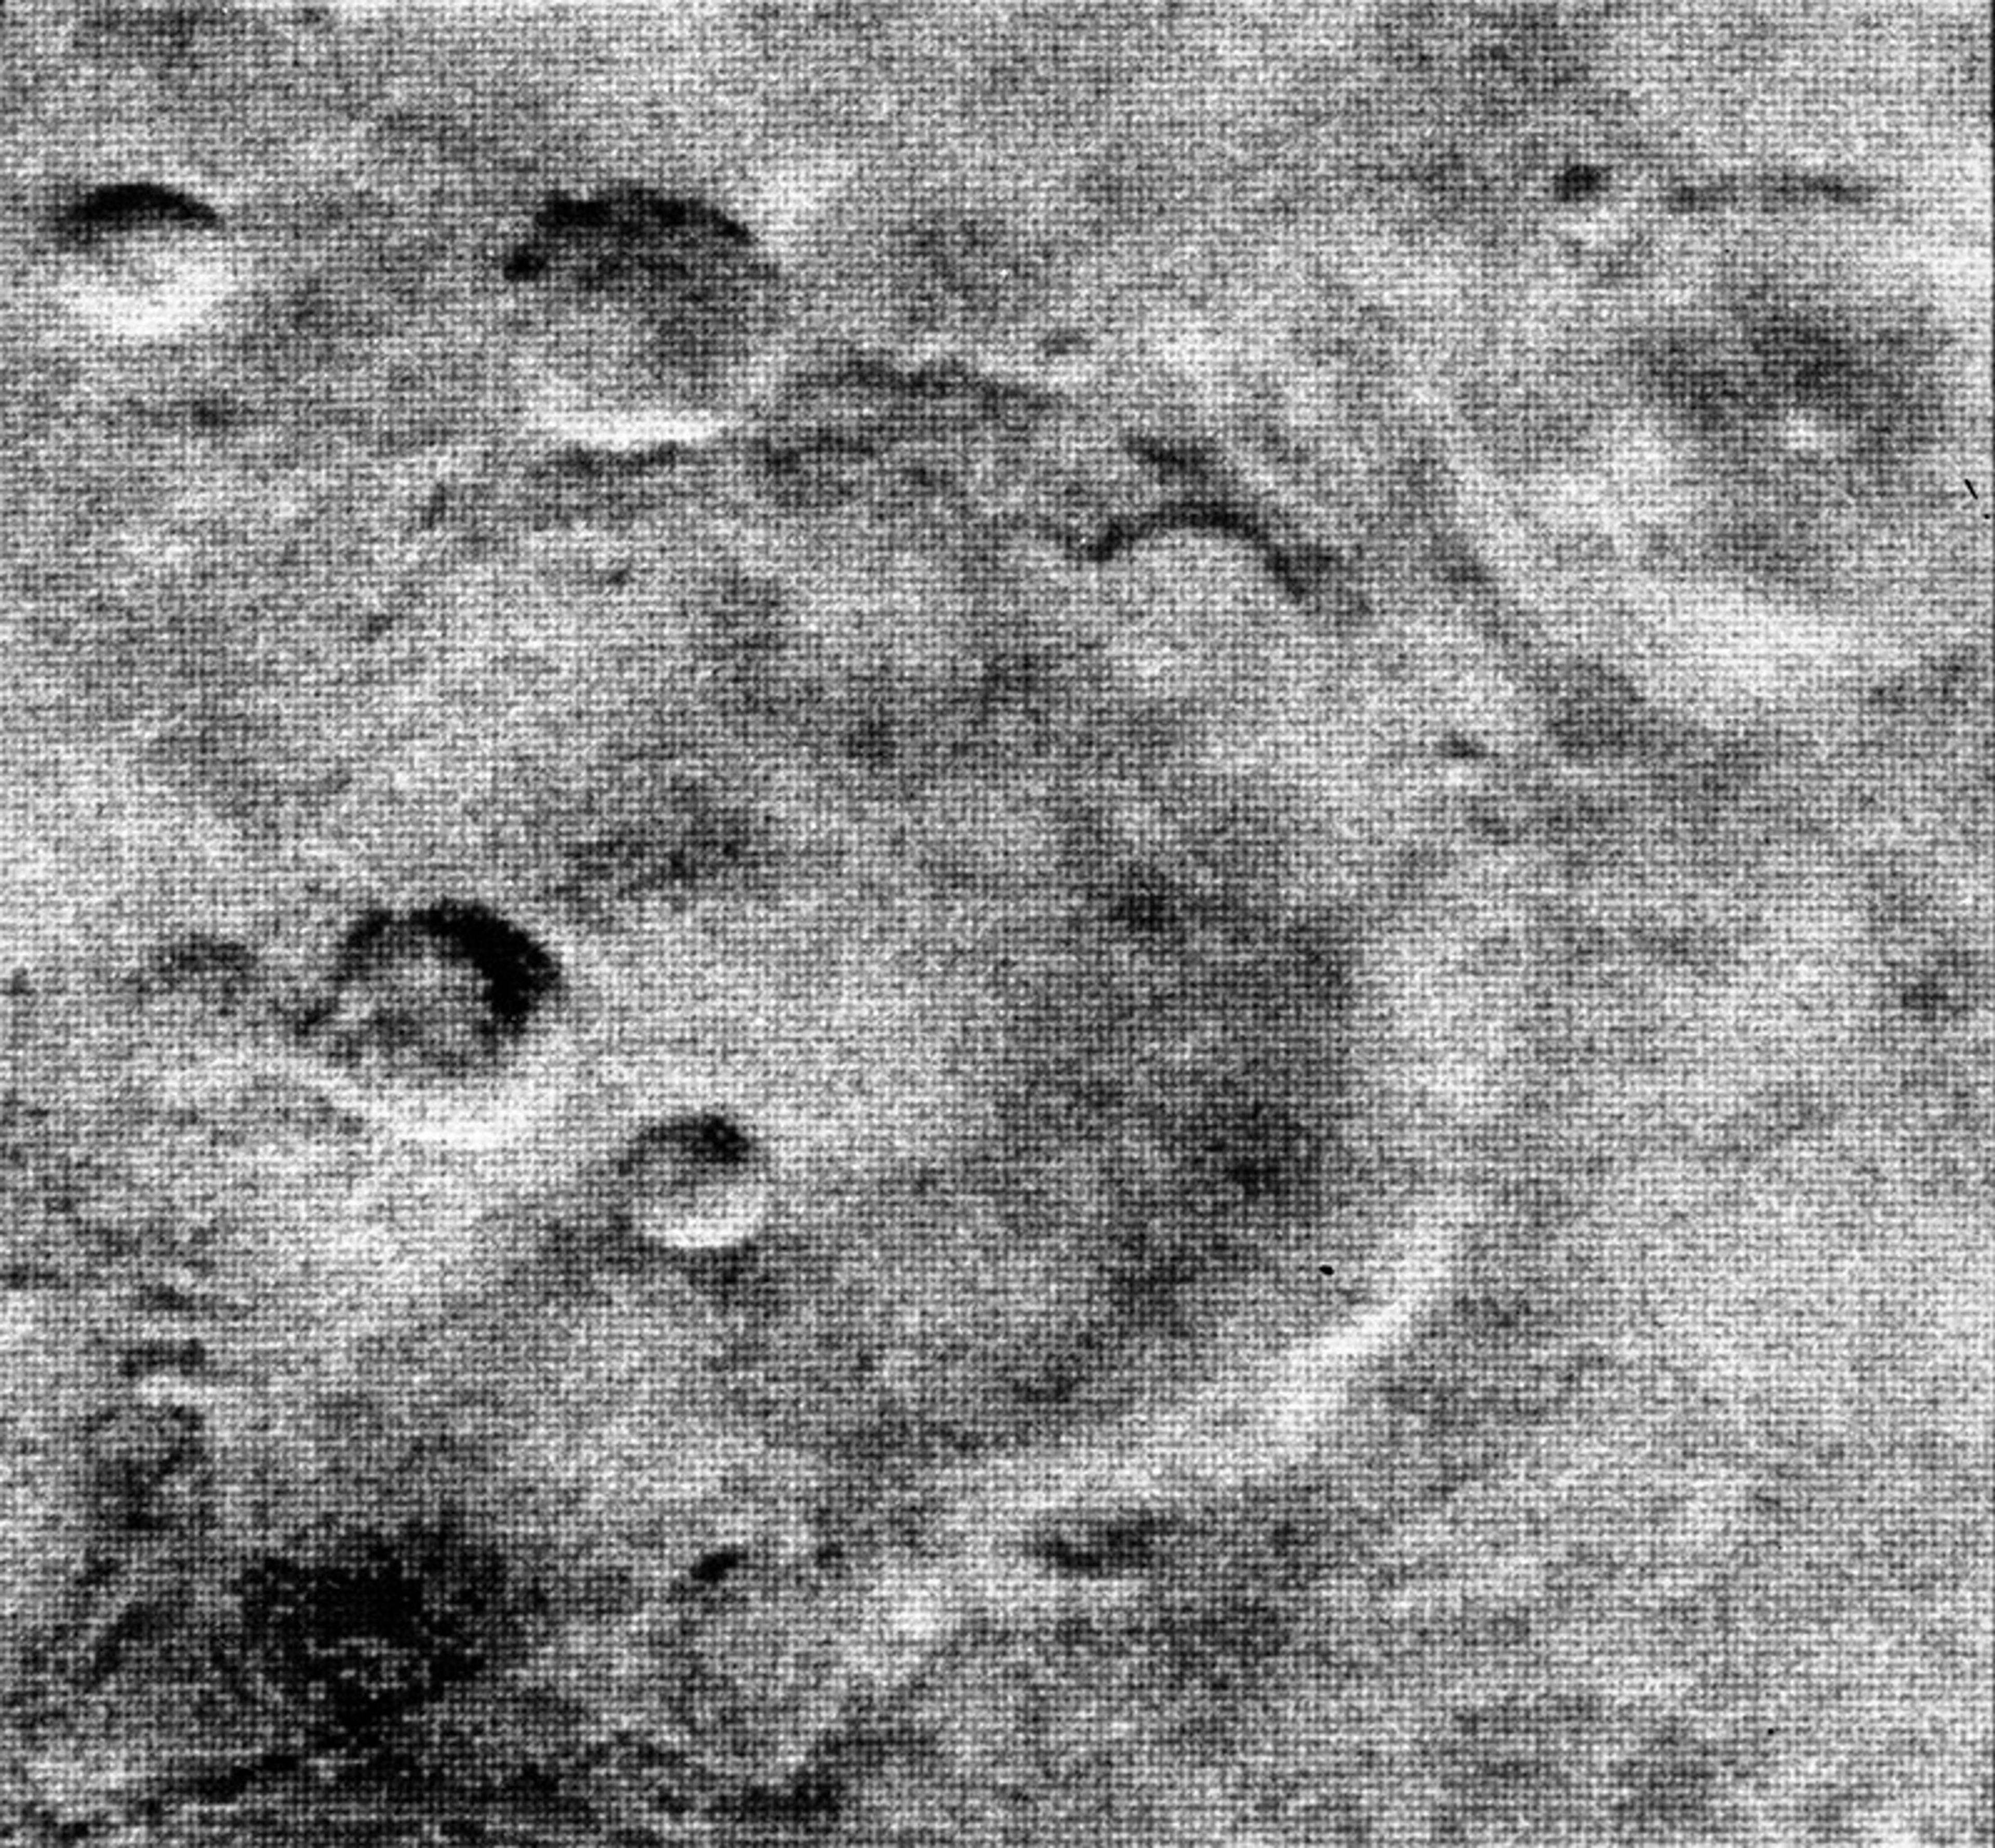 A grainy black-and-white photograph shows a section of the rough cratered surface of the planet Mars